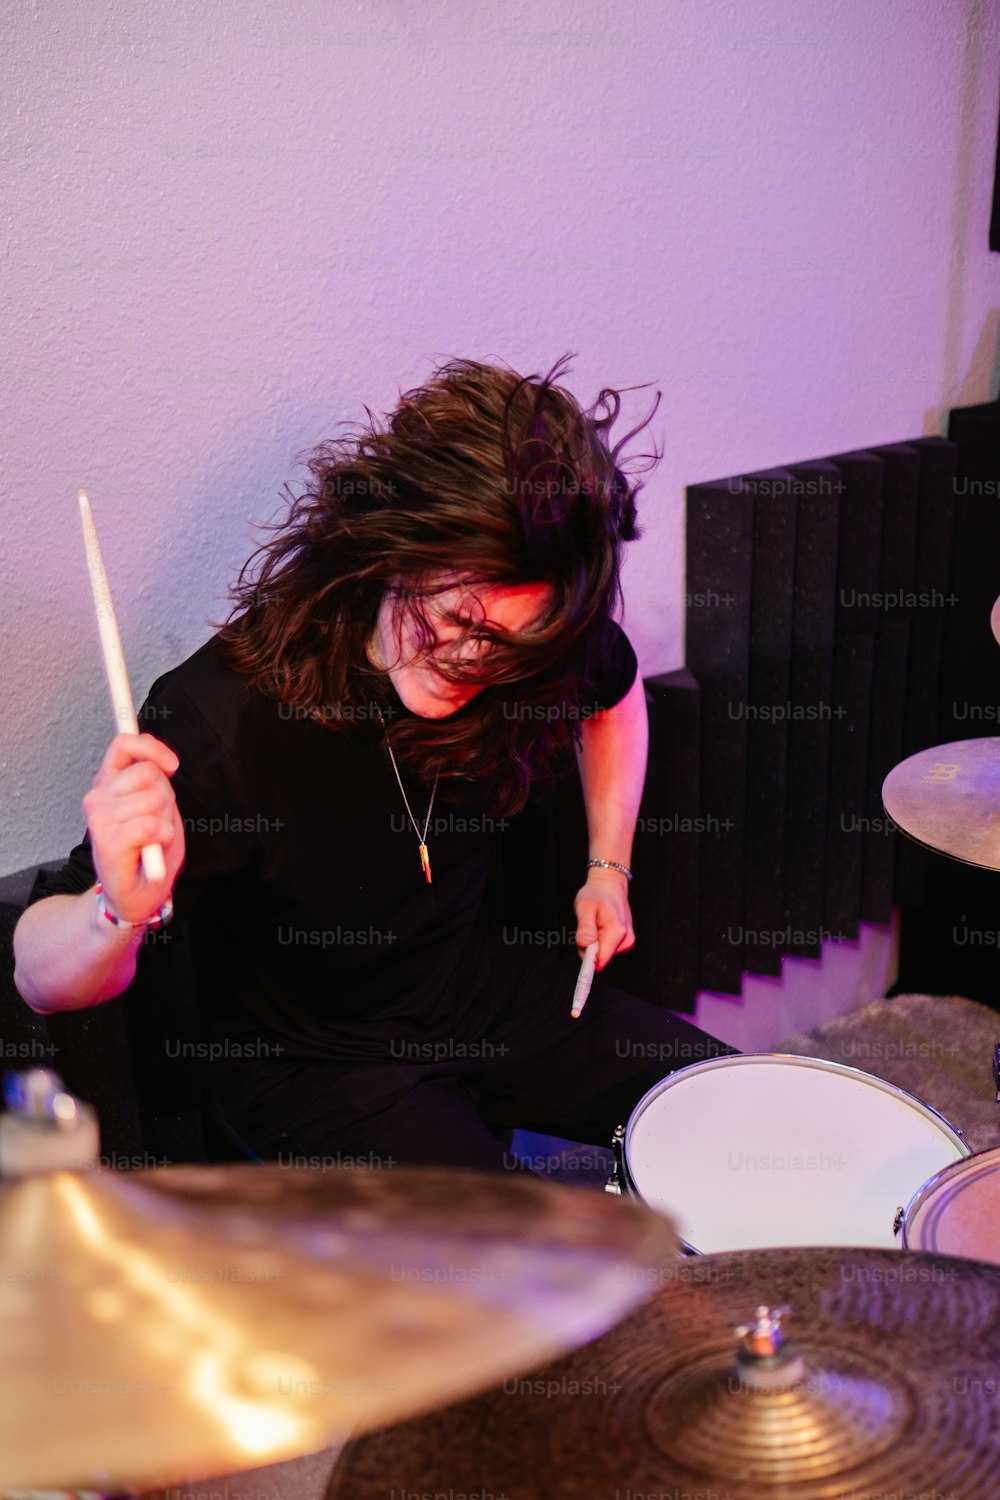 a woman is playing drums in a room